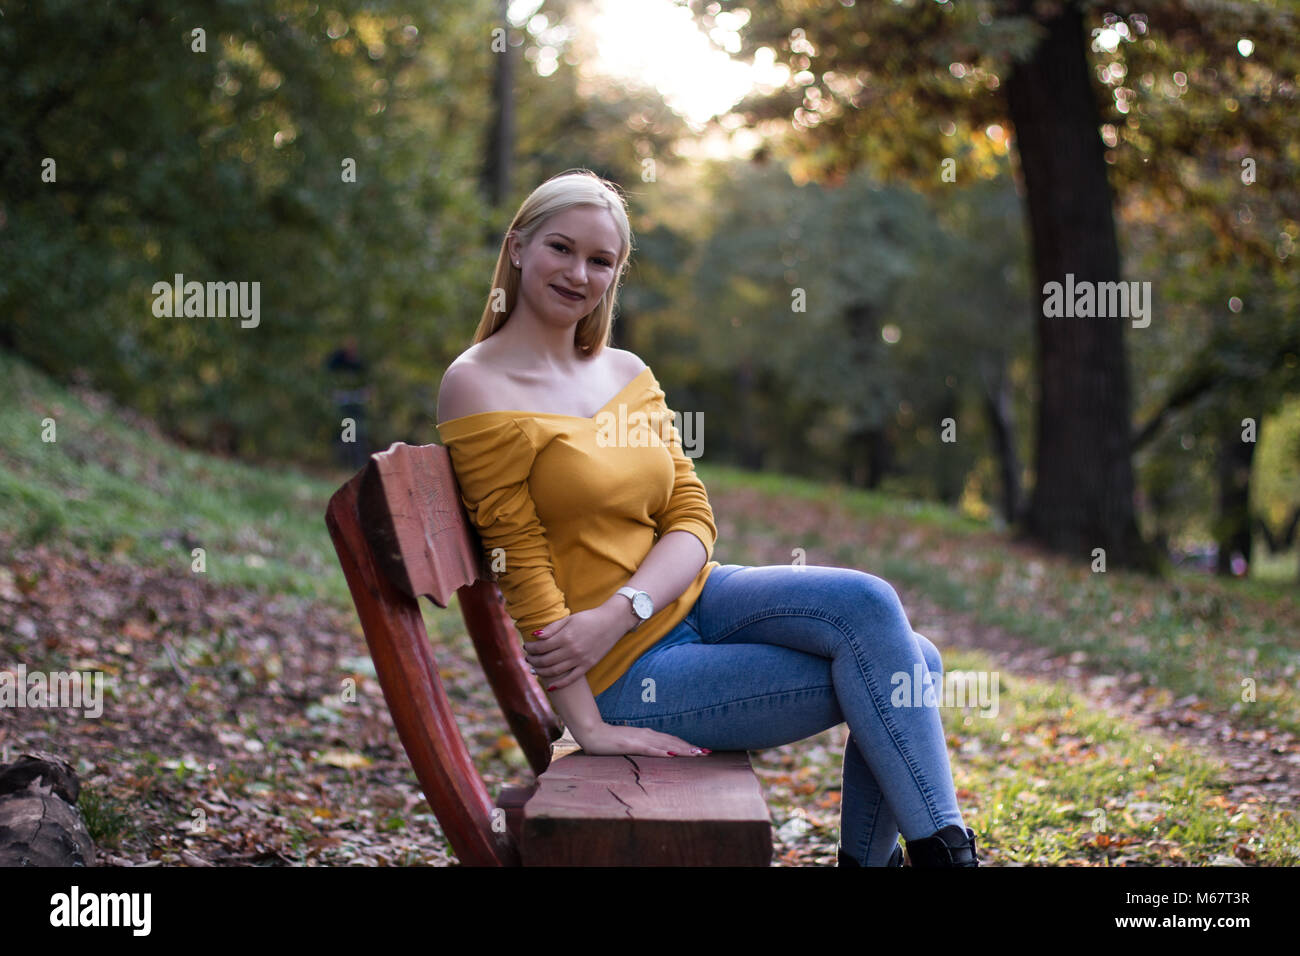 Young beautiful blonde woman sitting on a wooden bench in the park, enjoying nature Stock Photo